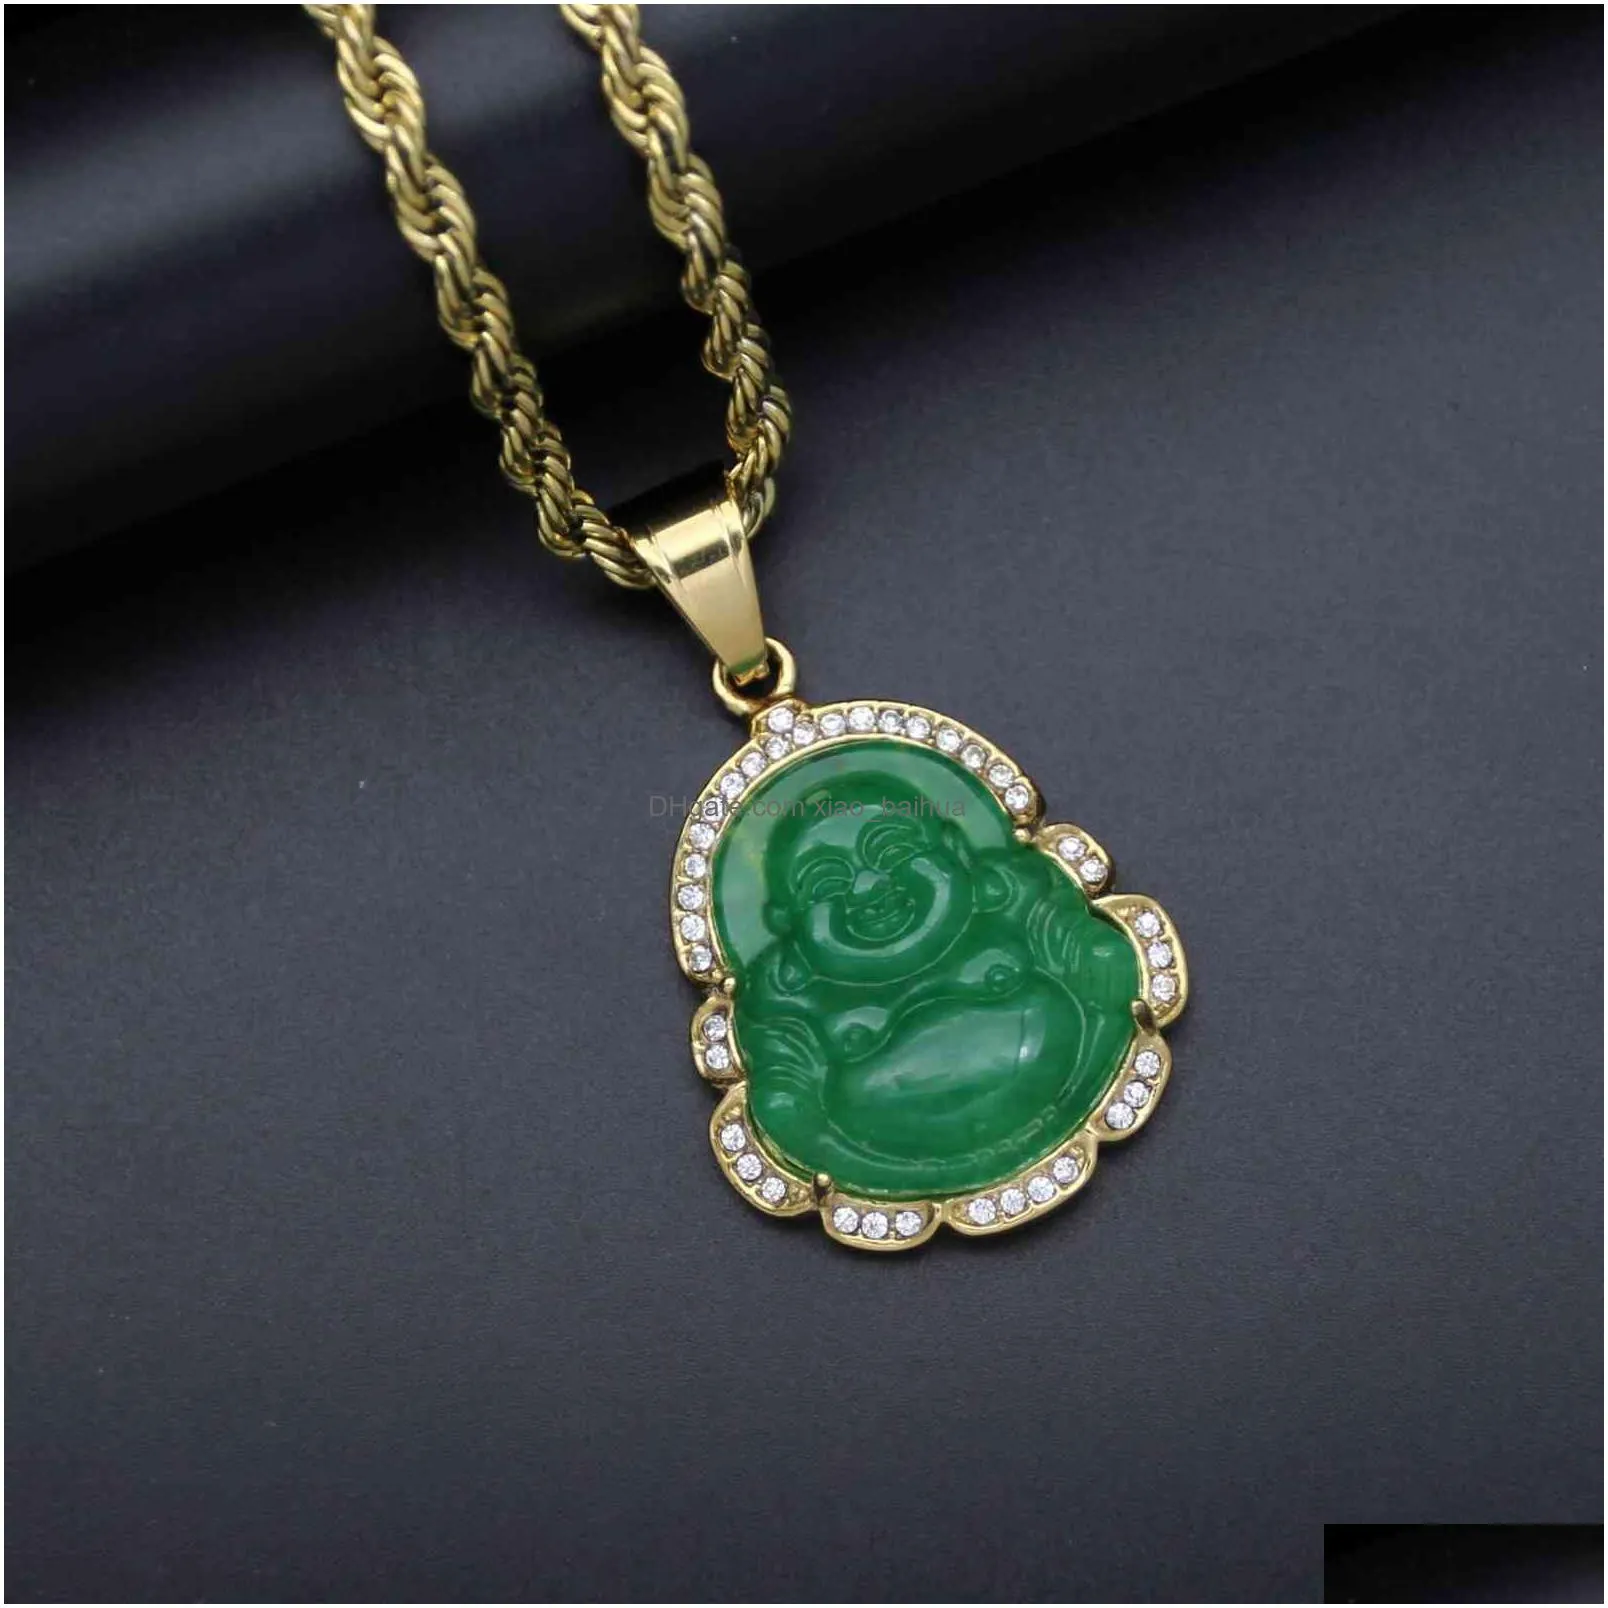 green jade jewelry laughing buddha pendant chain necklace for women stainless steel 18k gold plated amulet accessories mothers day